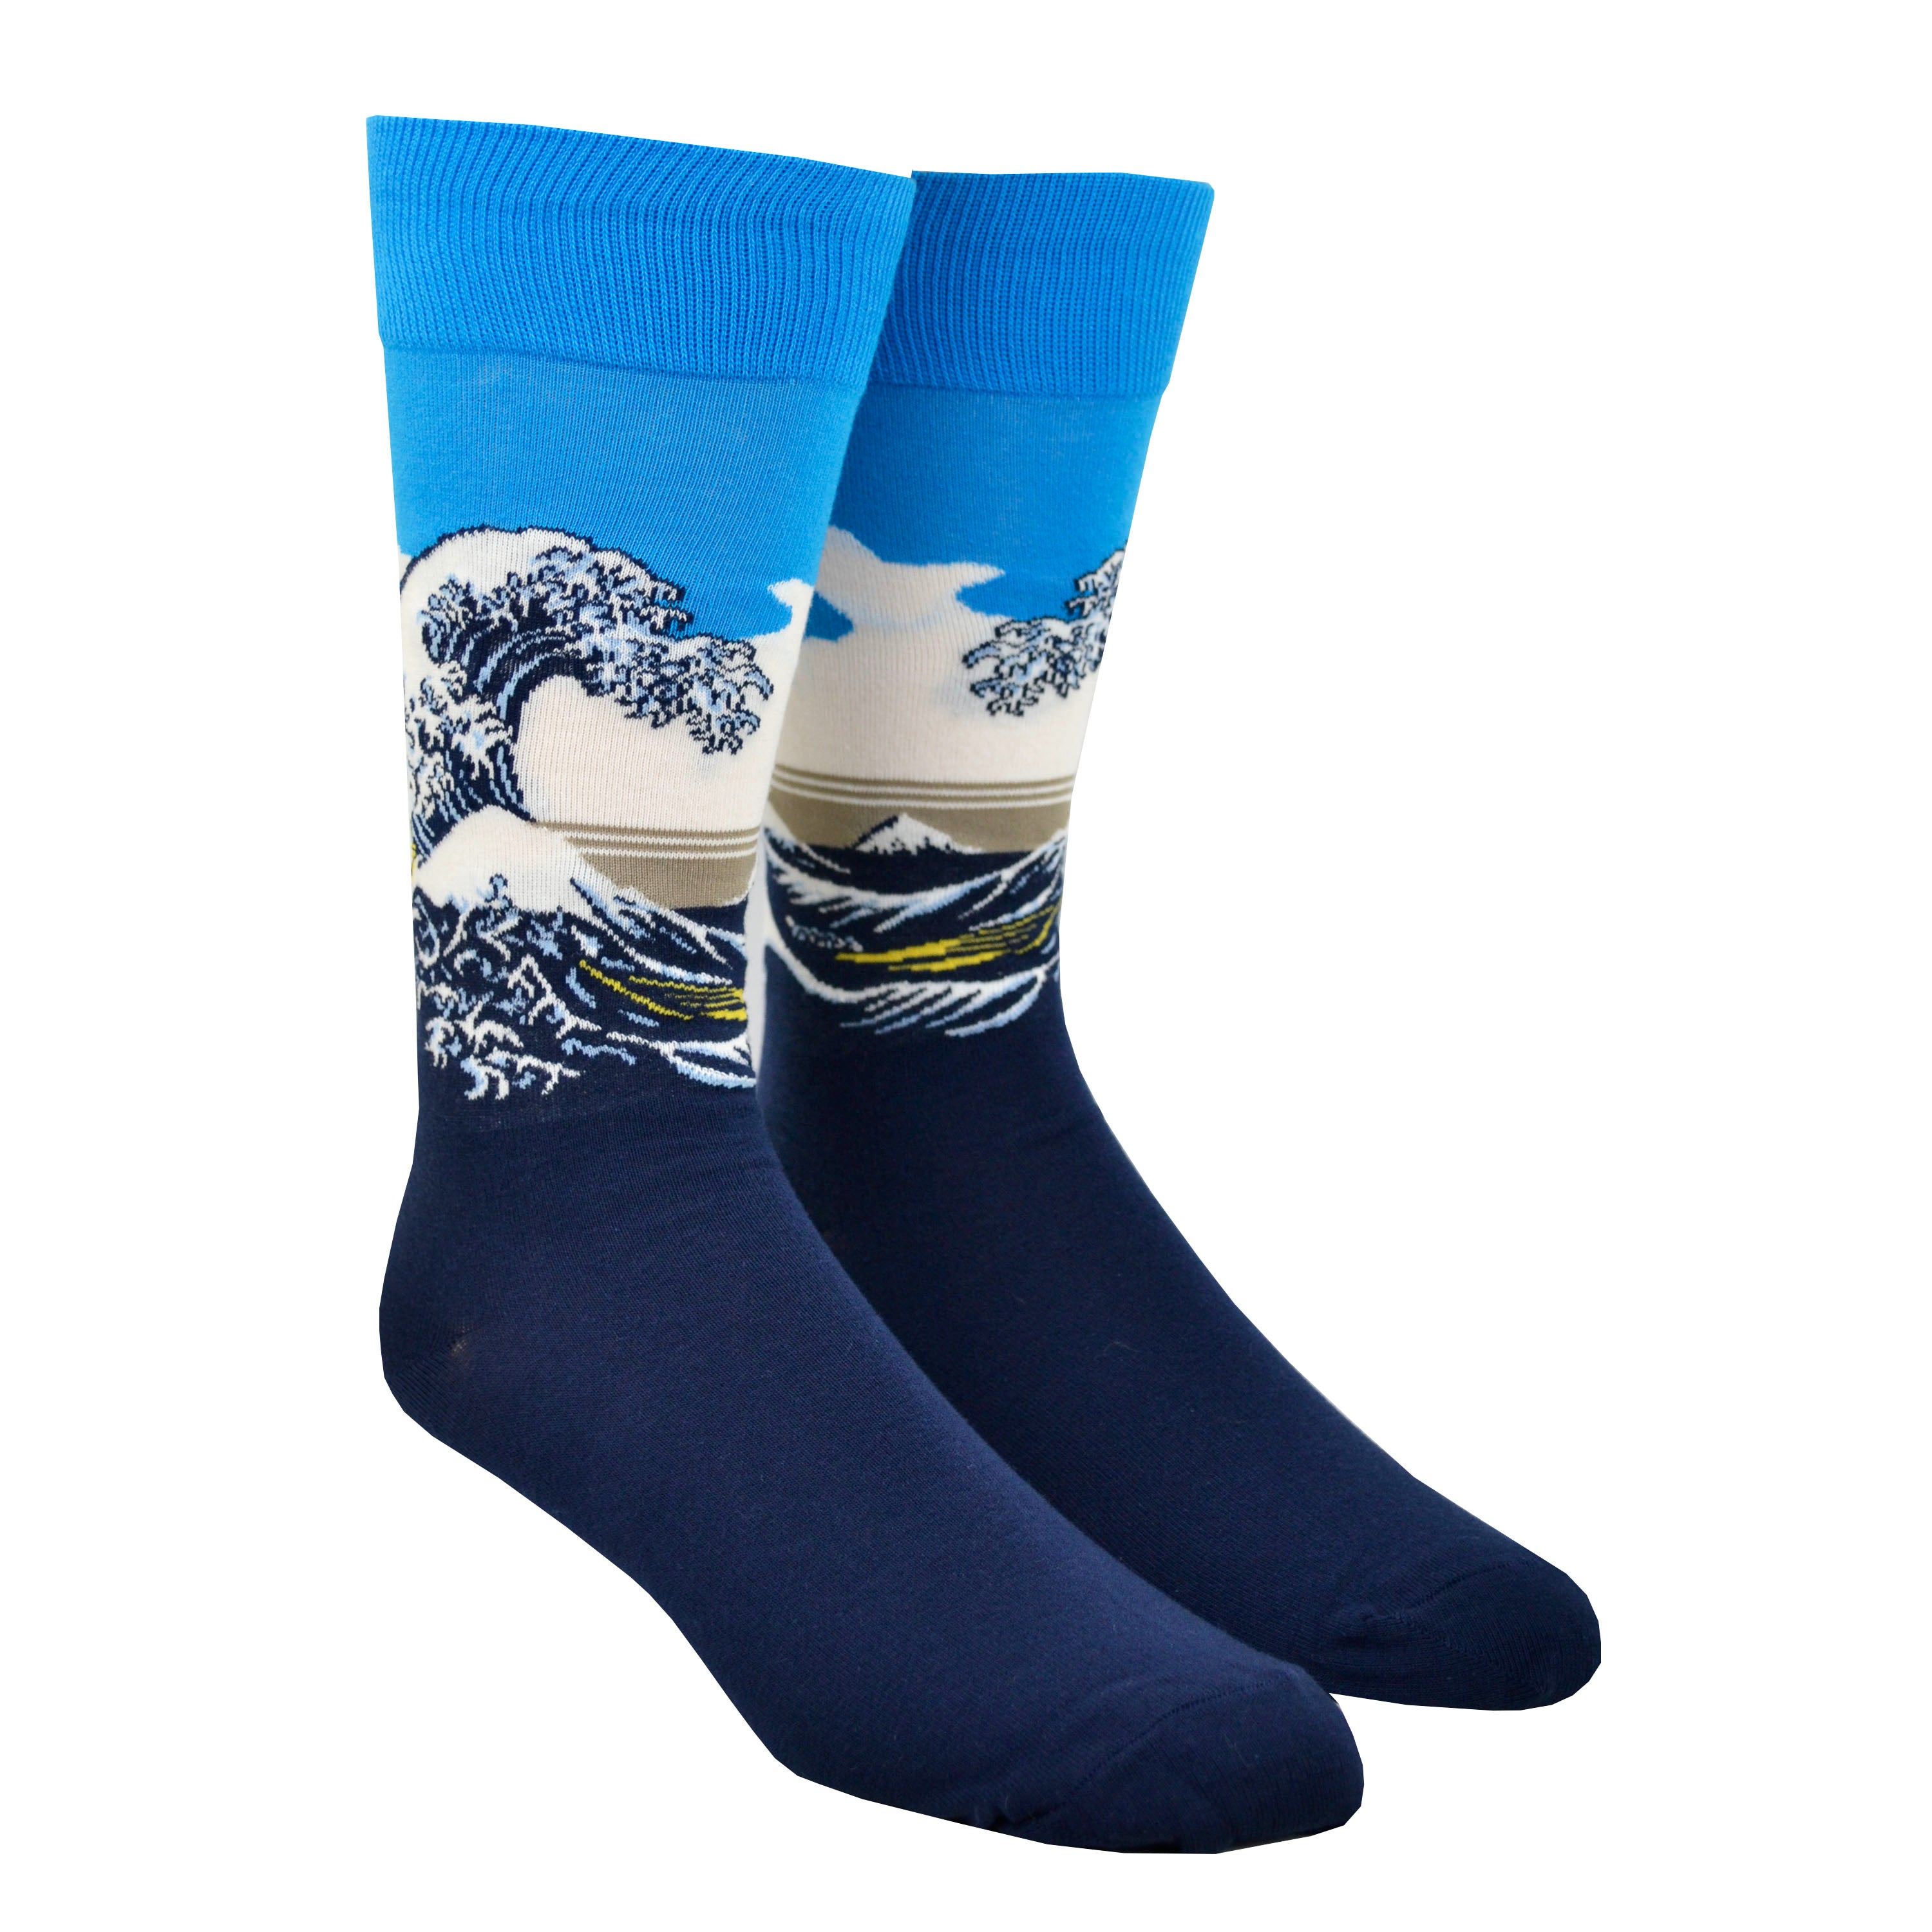 Shown on a leg form, these blue cotton men's crew socks by the brand Hot Sox feature the famous print The Great Wave by the Japanese artist Hokusai.